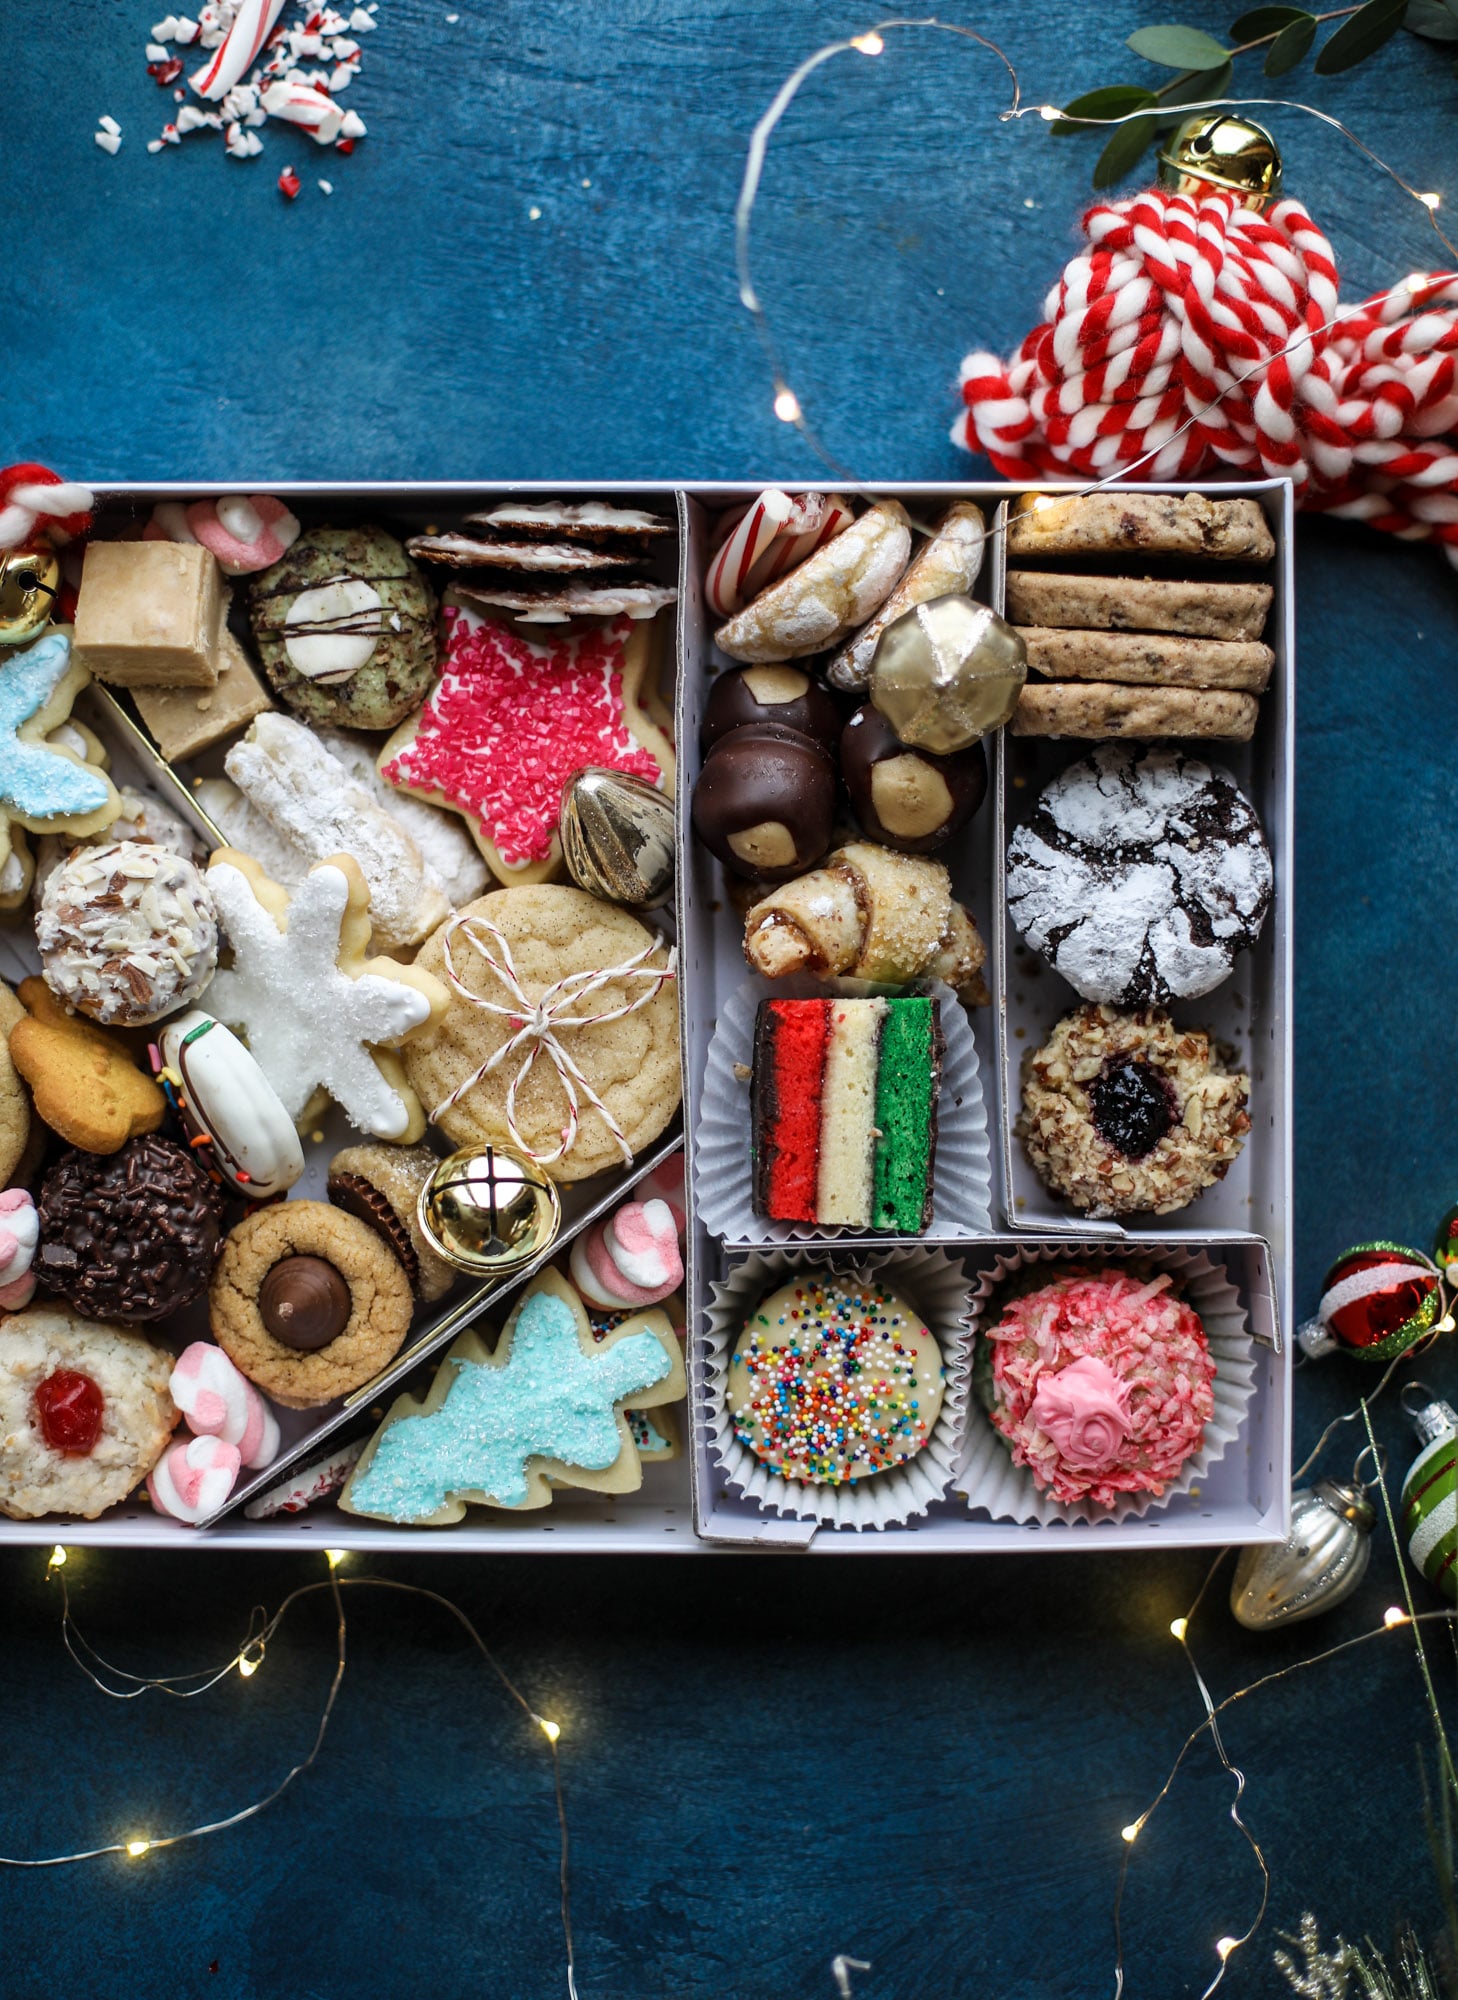 This list is made up of my 2018 best cookies to bake for Christmas and the holiday season! These are tried and true favorites that our friends and family love - ones we put on our cookie trays every single year! I howsweeteats.com #cookies #christmas #box